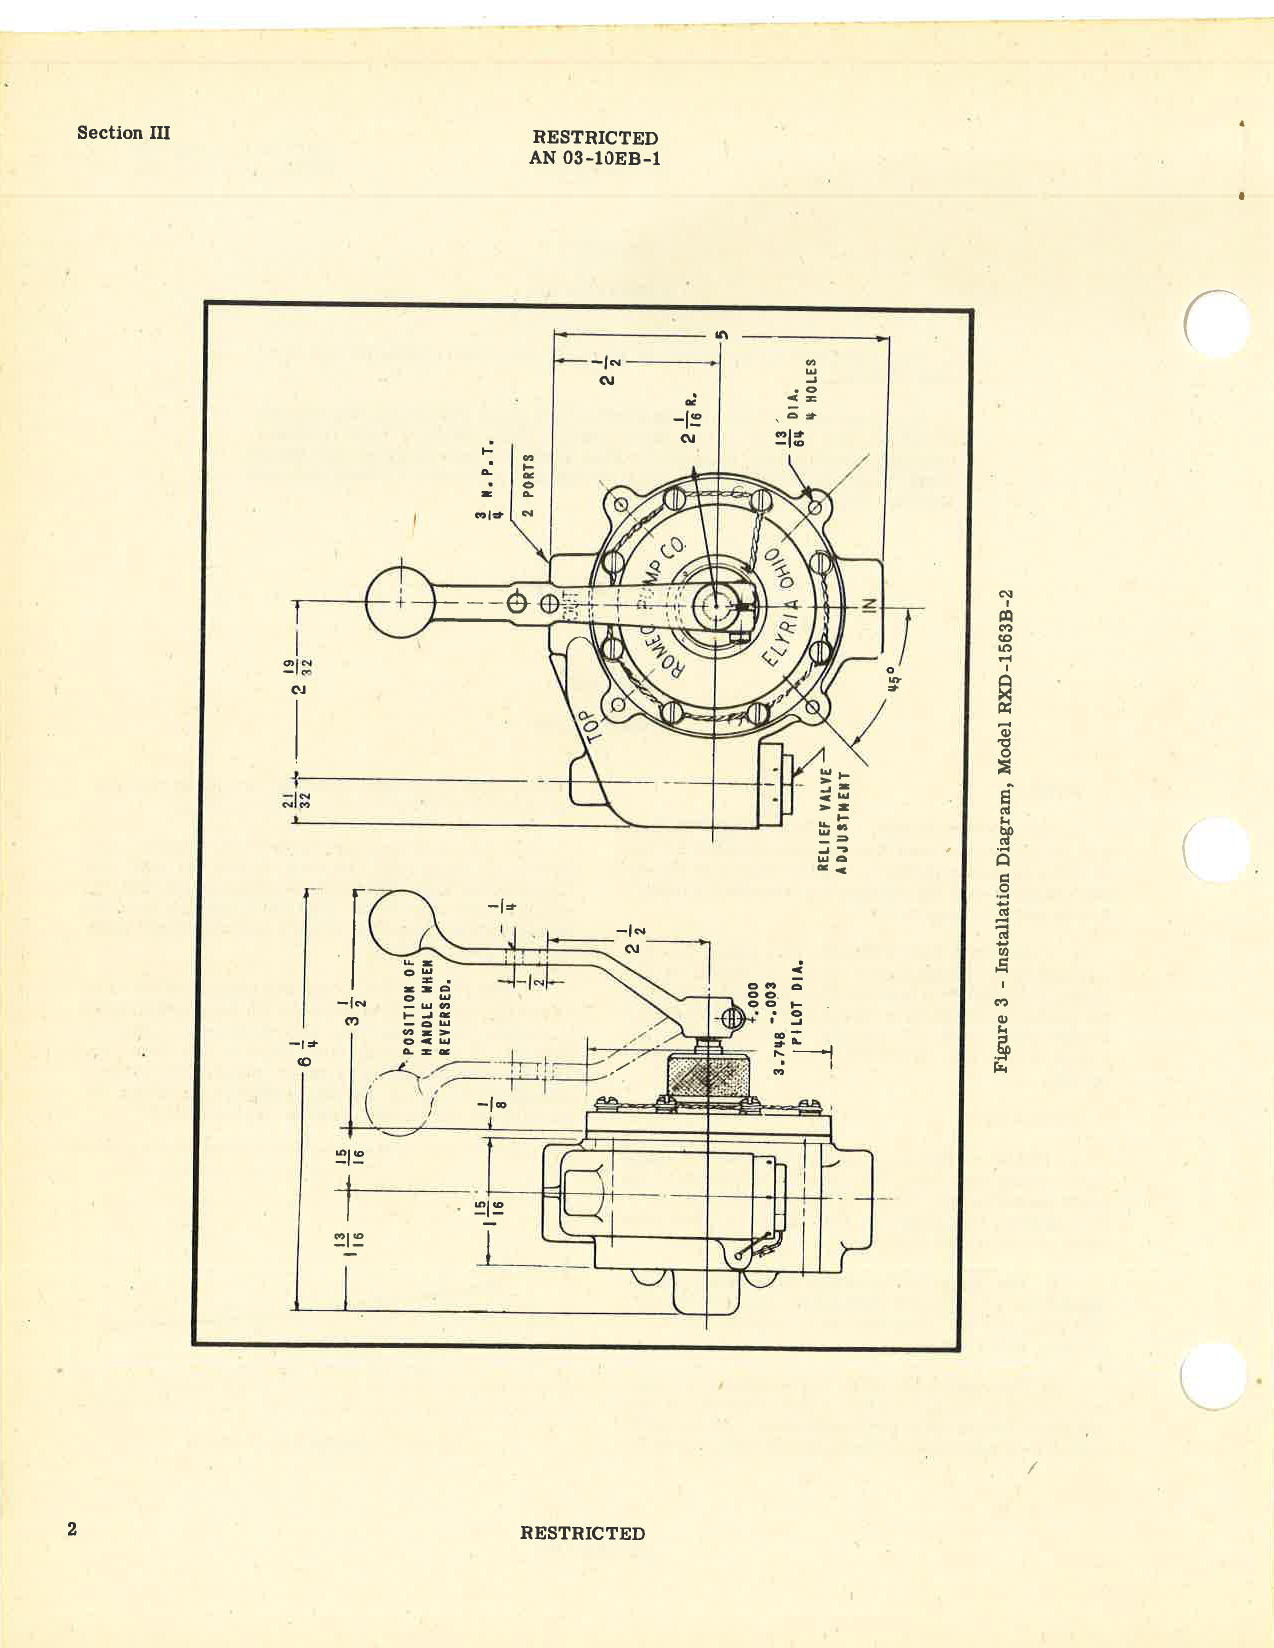 Sample page 6 from AirCorps Library document: Handbook of Instructions with Parts Catalog for Type D-2 Fuel Pump